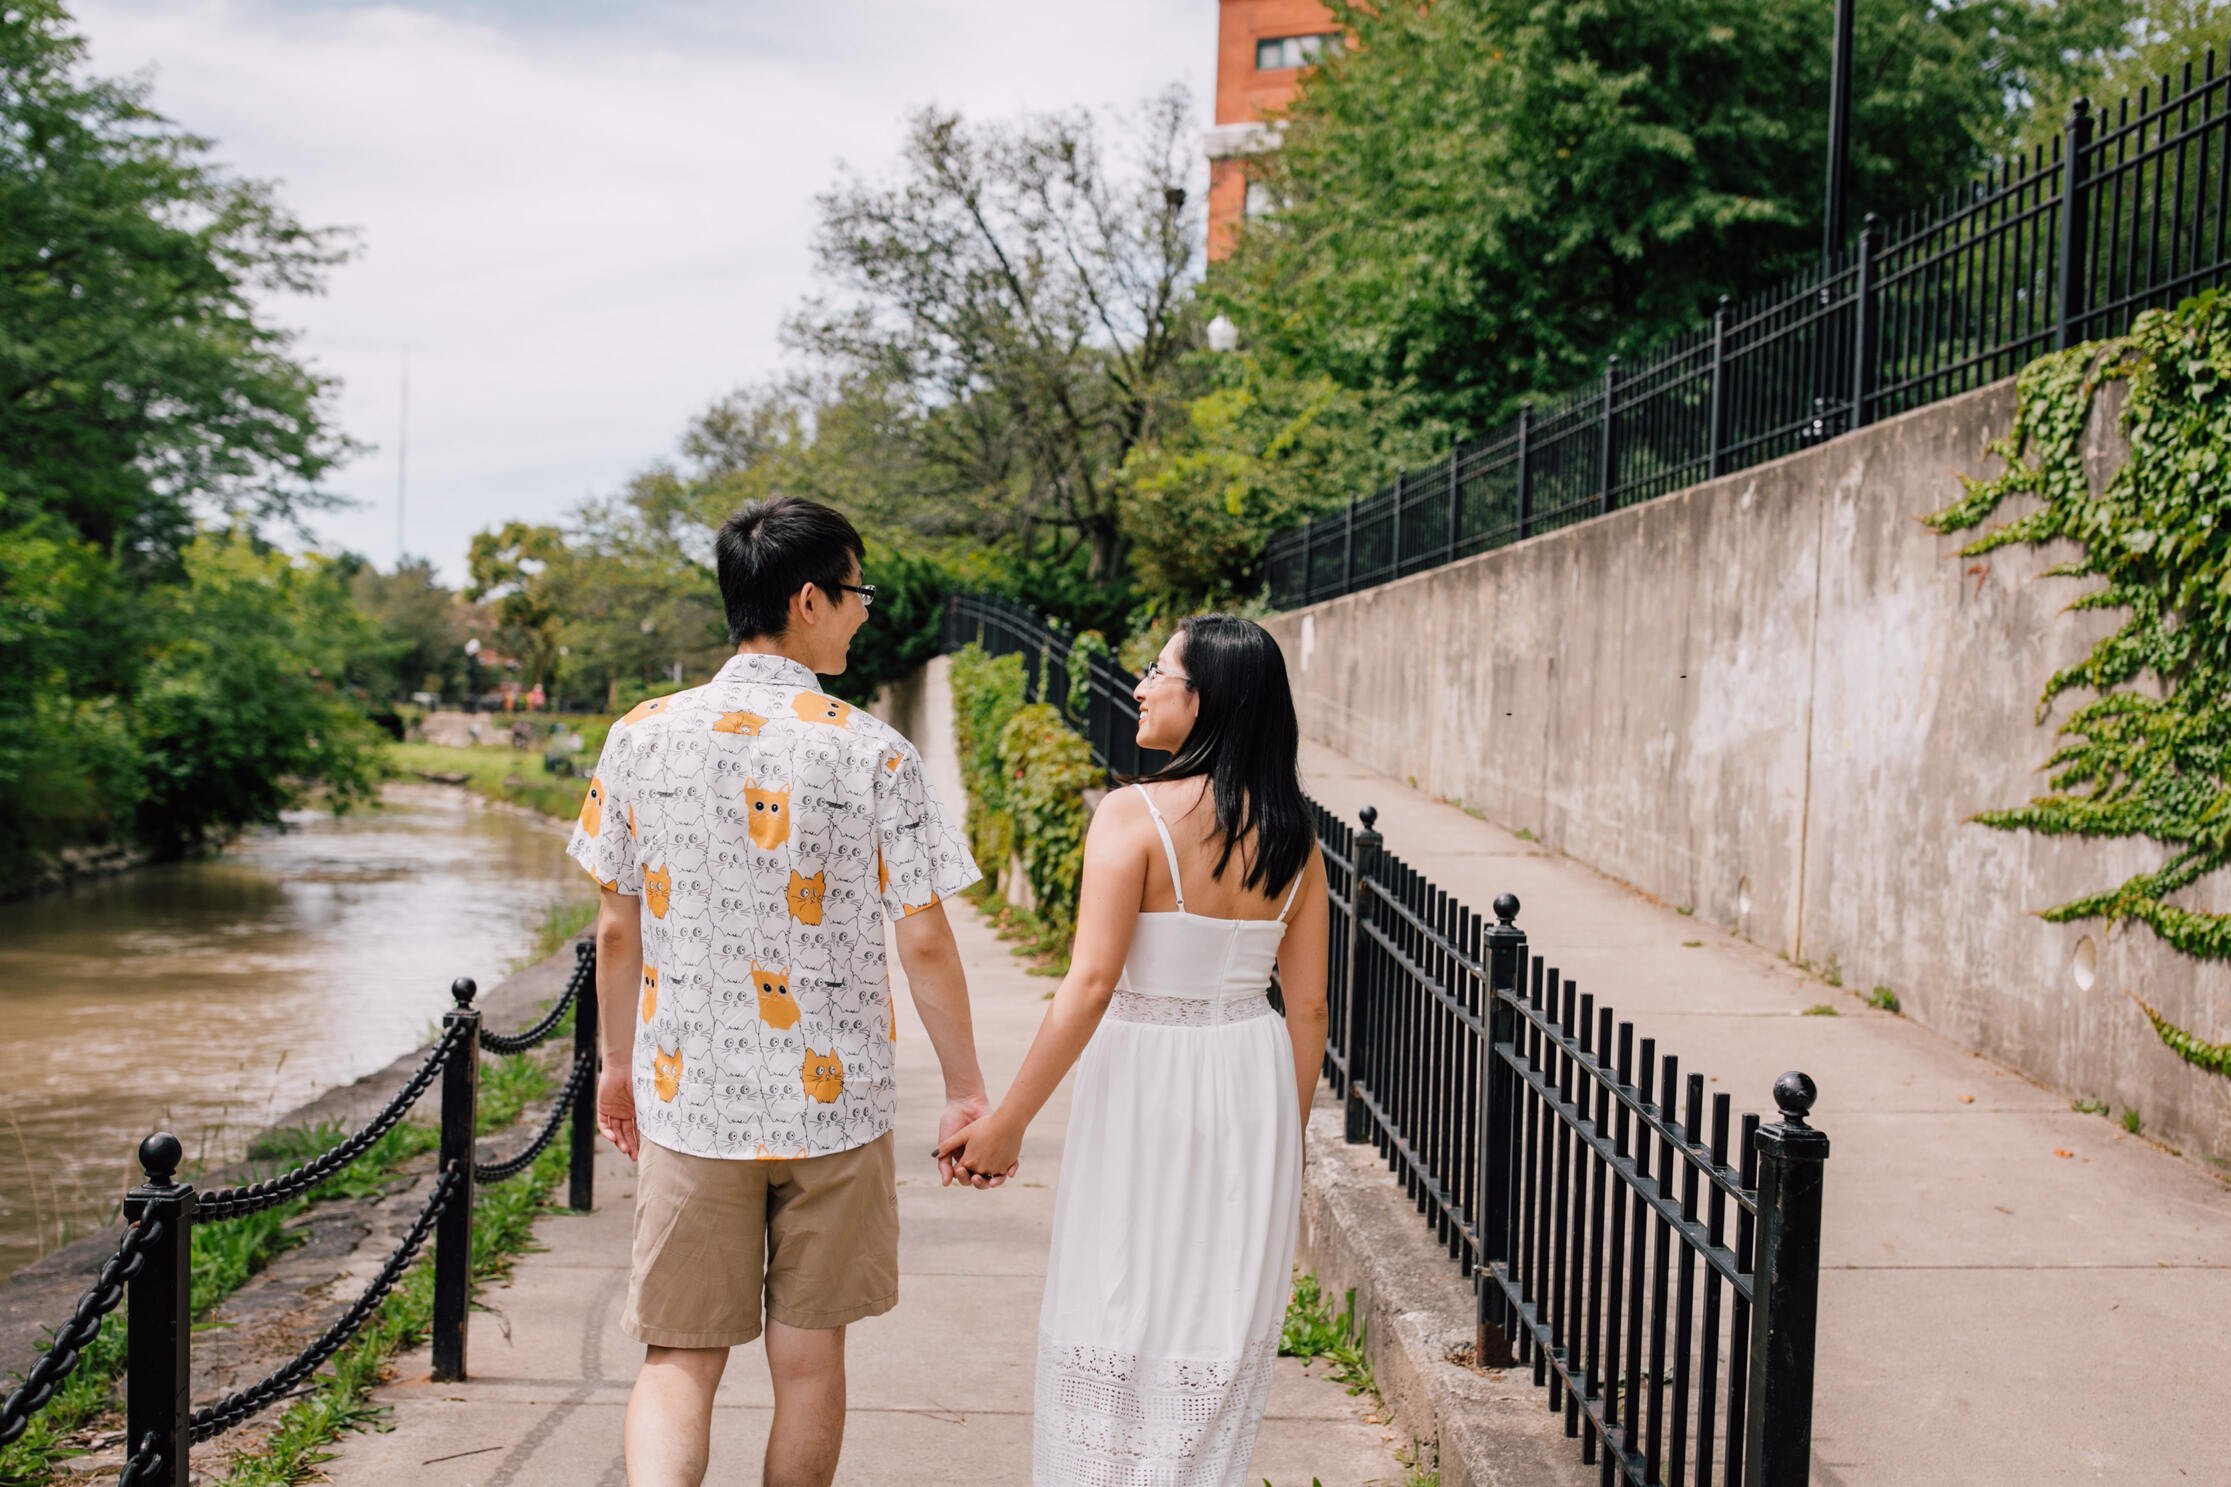  An engaged couple walk hand in hand on a sidewalk next to a creek during their engagement session, Syracuse creekwalk 